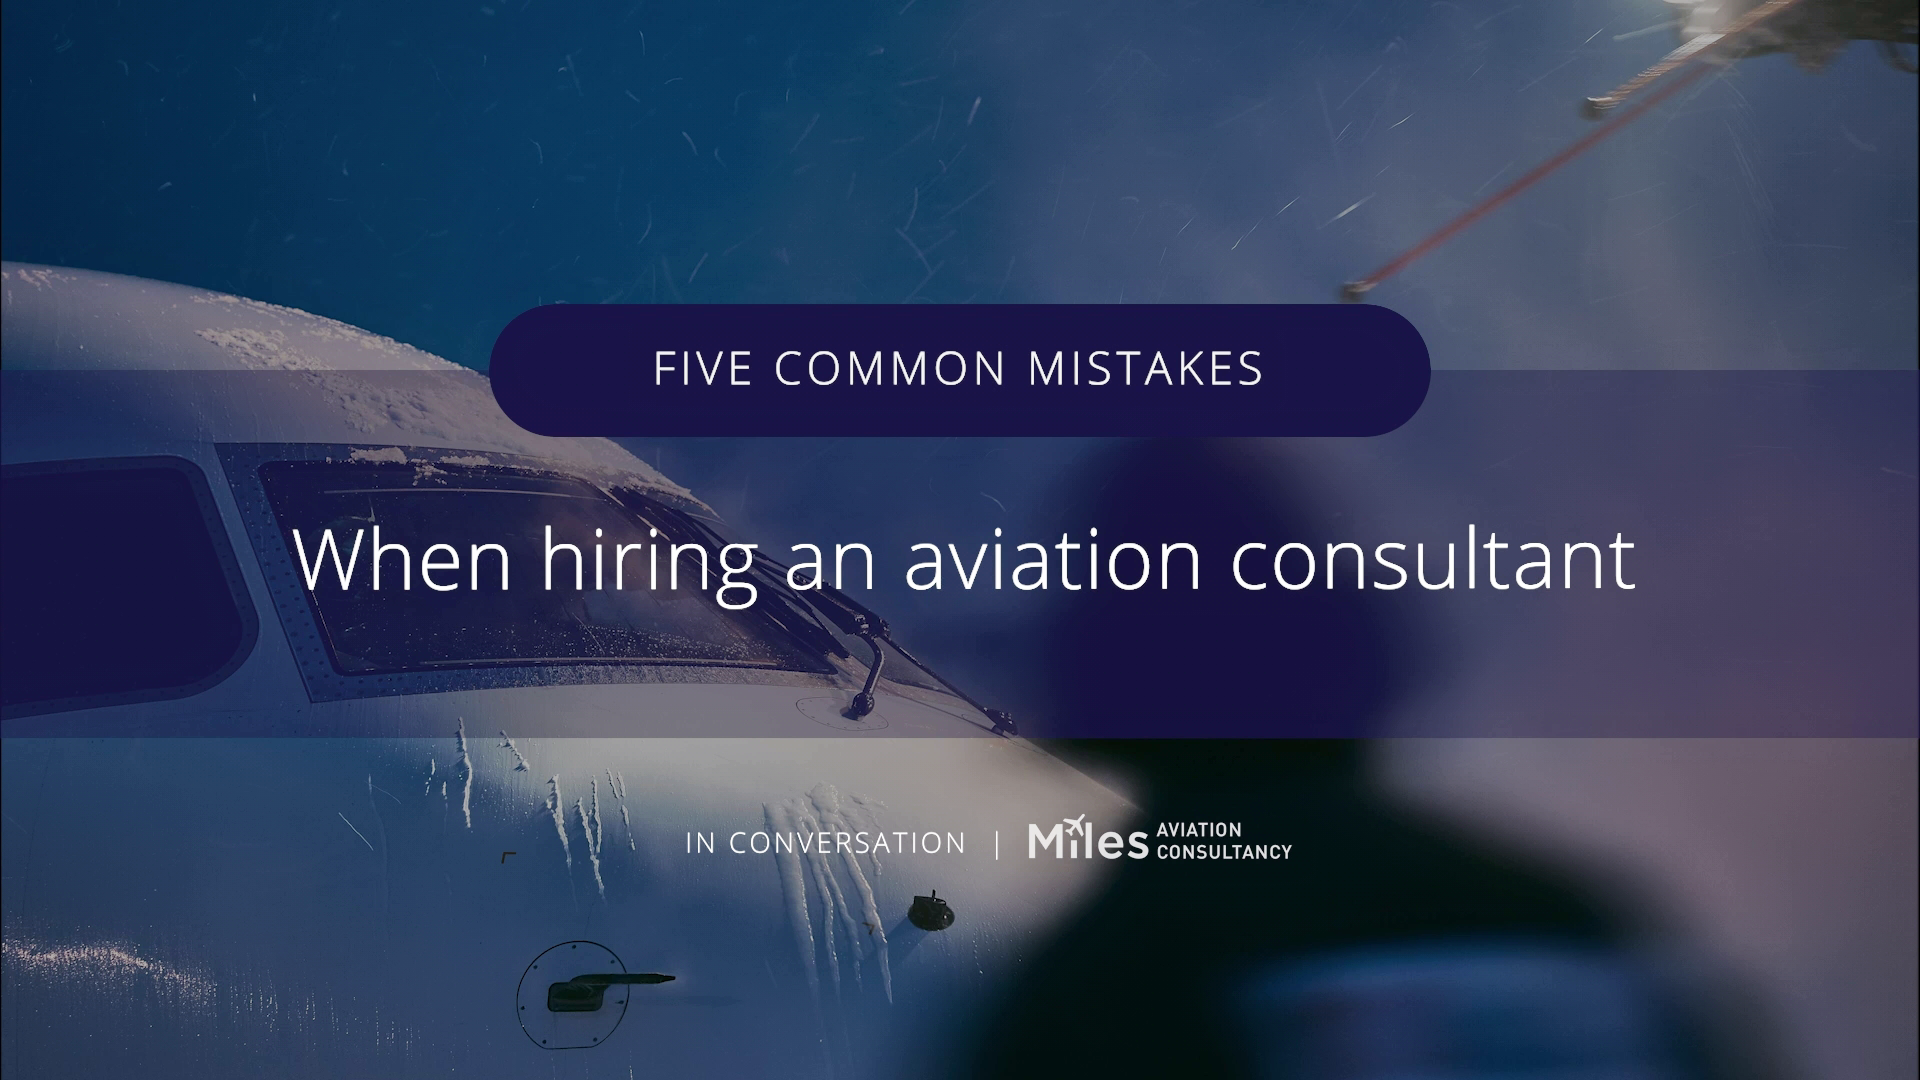 Five most common mistakes that are made when hiring an Aviation Consultant